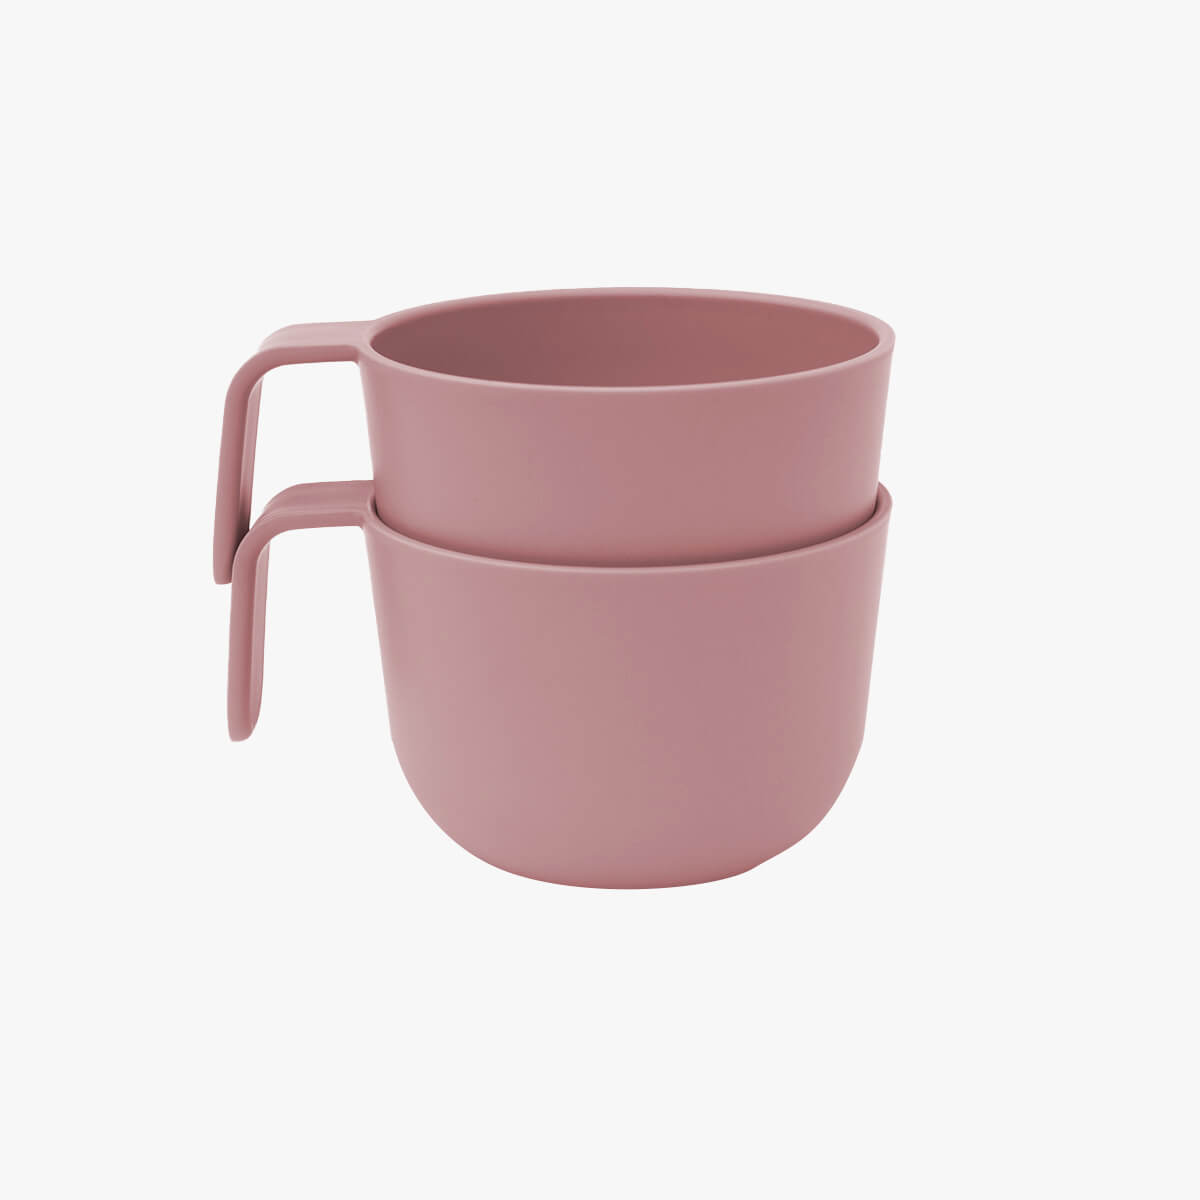 Snack Bowl in Blush / ezpz Basics Line / Bowl with Handle and Lid for Kids